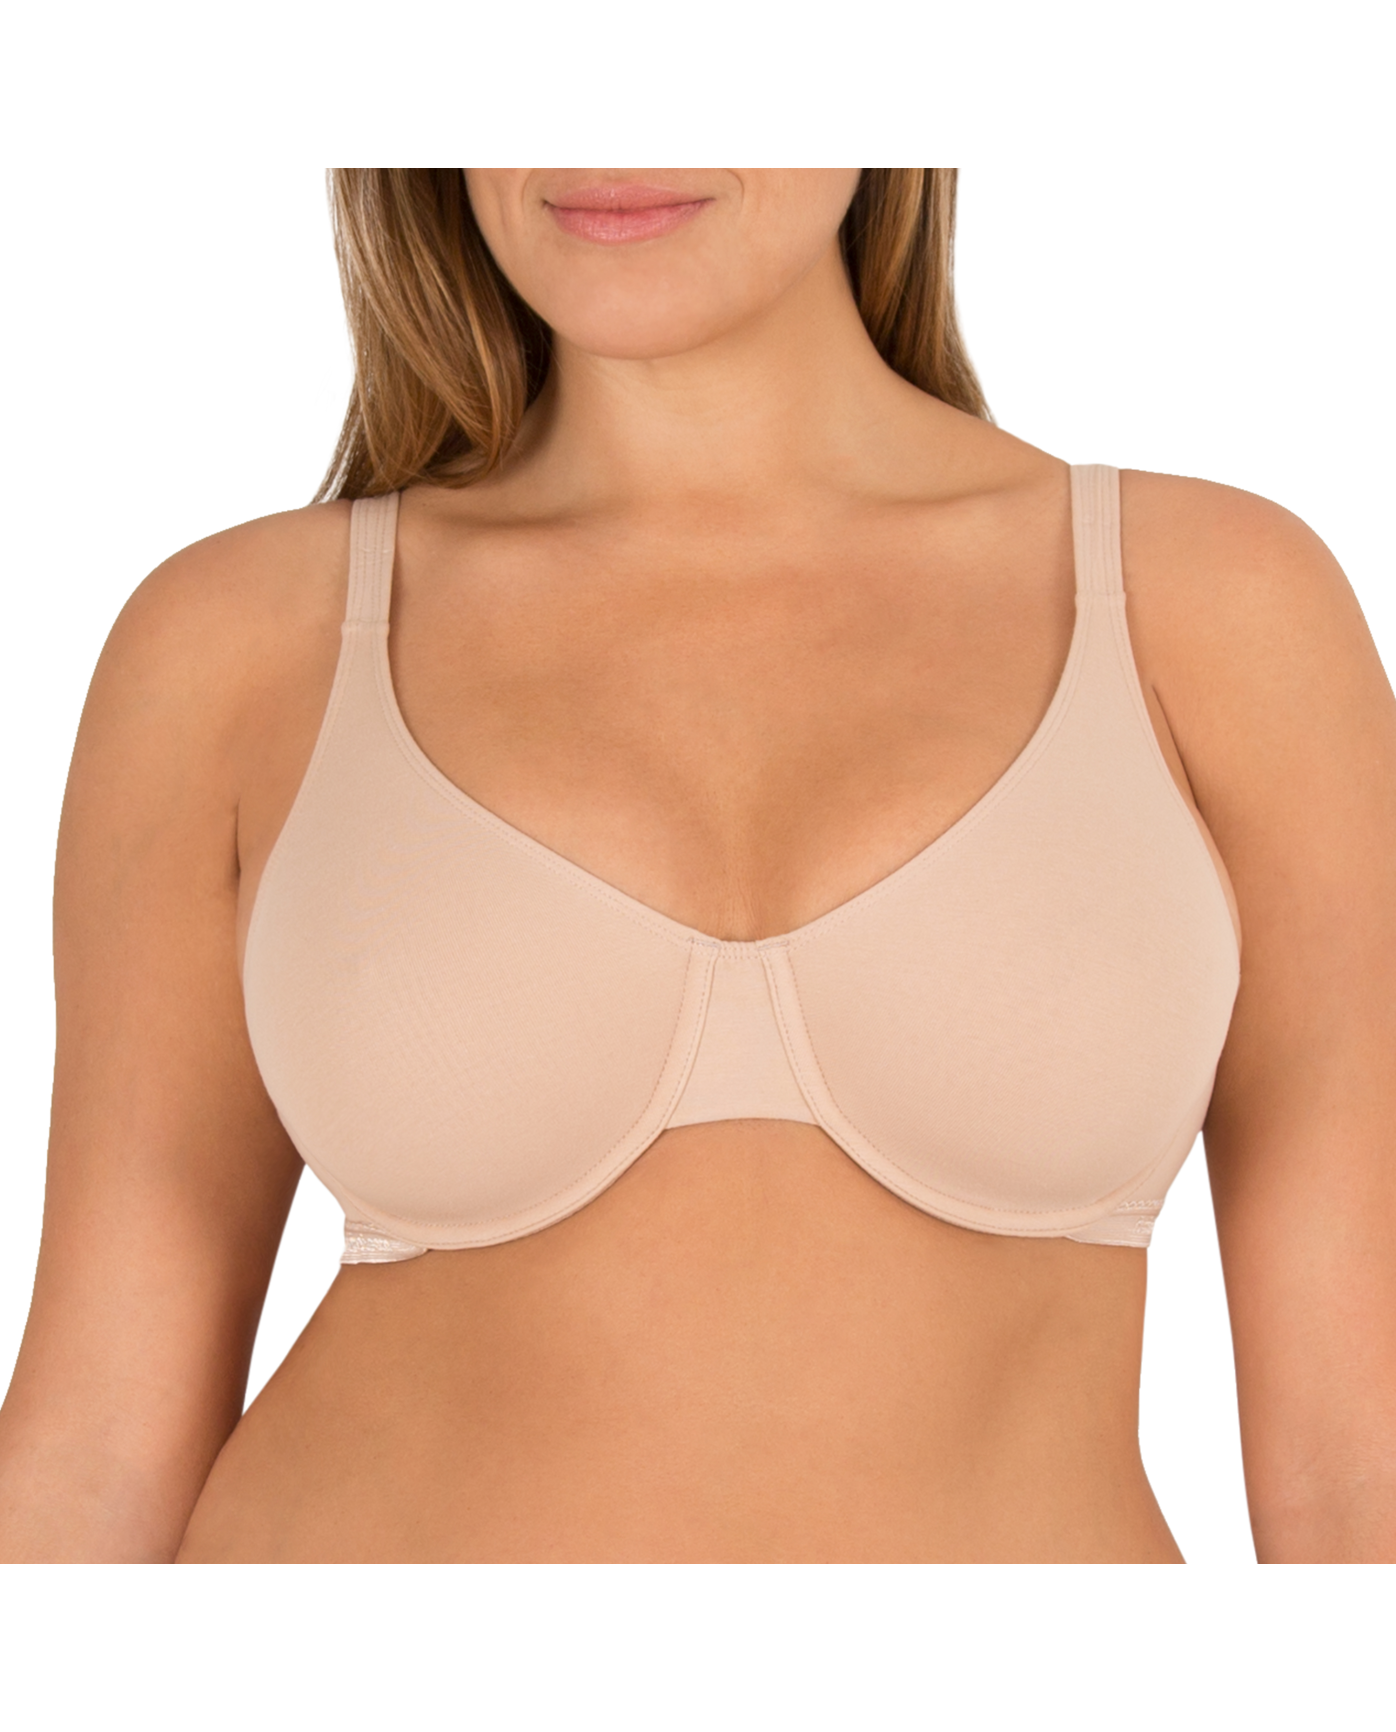 Find more Vs Bra 38b/sister Size Is 36c for sale at up to 90% off